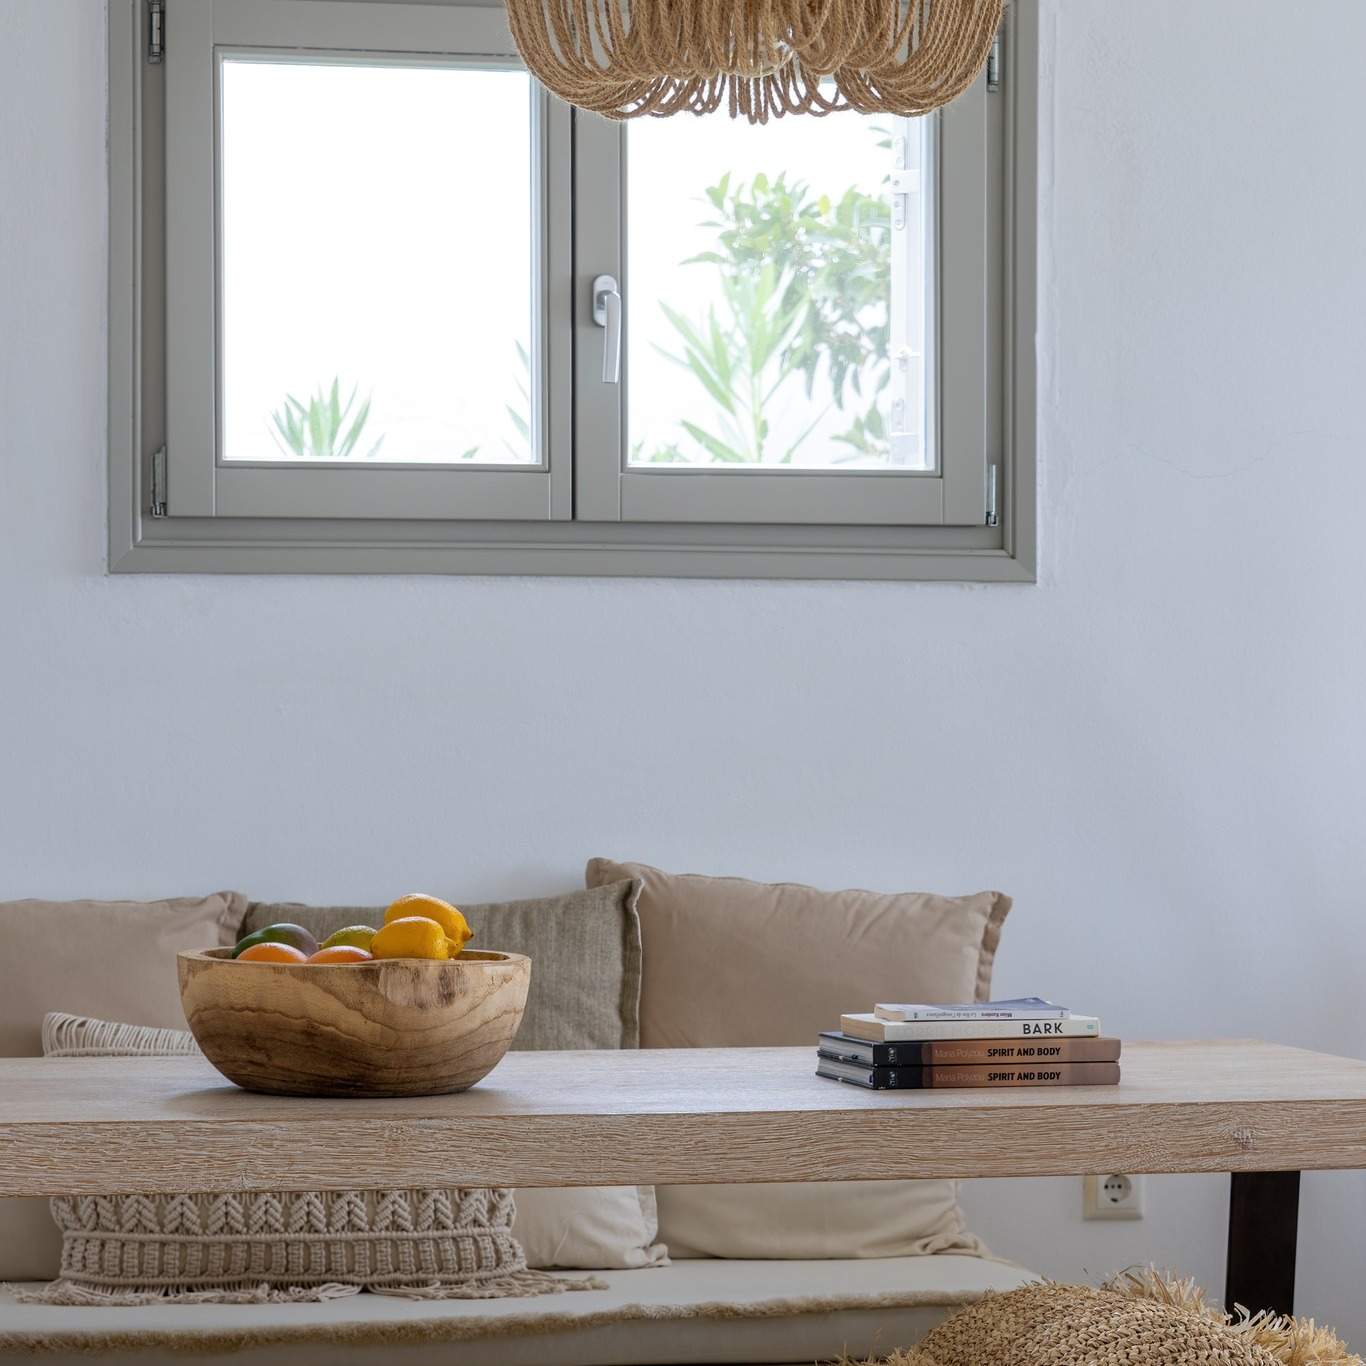 Zefyros. Simplicity is the ultimate sophistication. Step into the serene interior where minimalistic design creates an oasis of calm and elegance. Clean lines, neutral tones, and thoughtful details harmonize to offer a space that nurtures both body and mind.
.
#amalgamhomes #artofcomfort #greece #visitgreece #greekislands #cyclades #greekislands #paros #naxos #mykonos #tinos #ampelas #kastraki #triantaros #travel #wanderlust #greeksummer #discovergreece